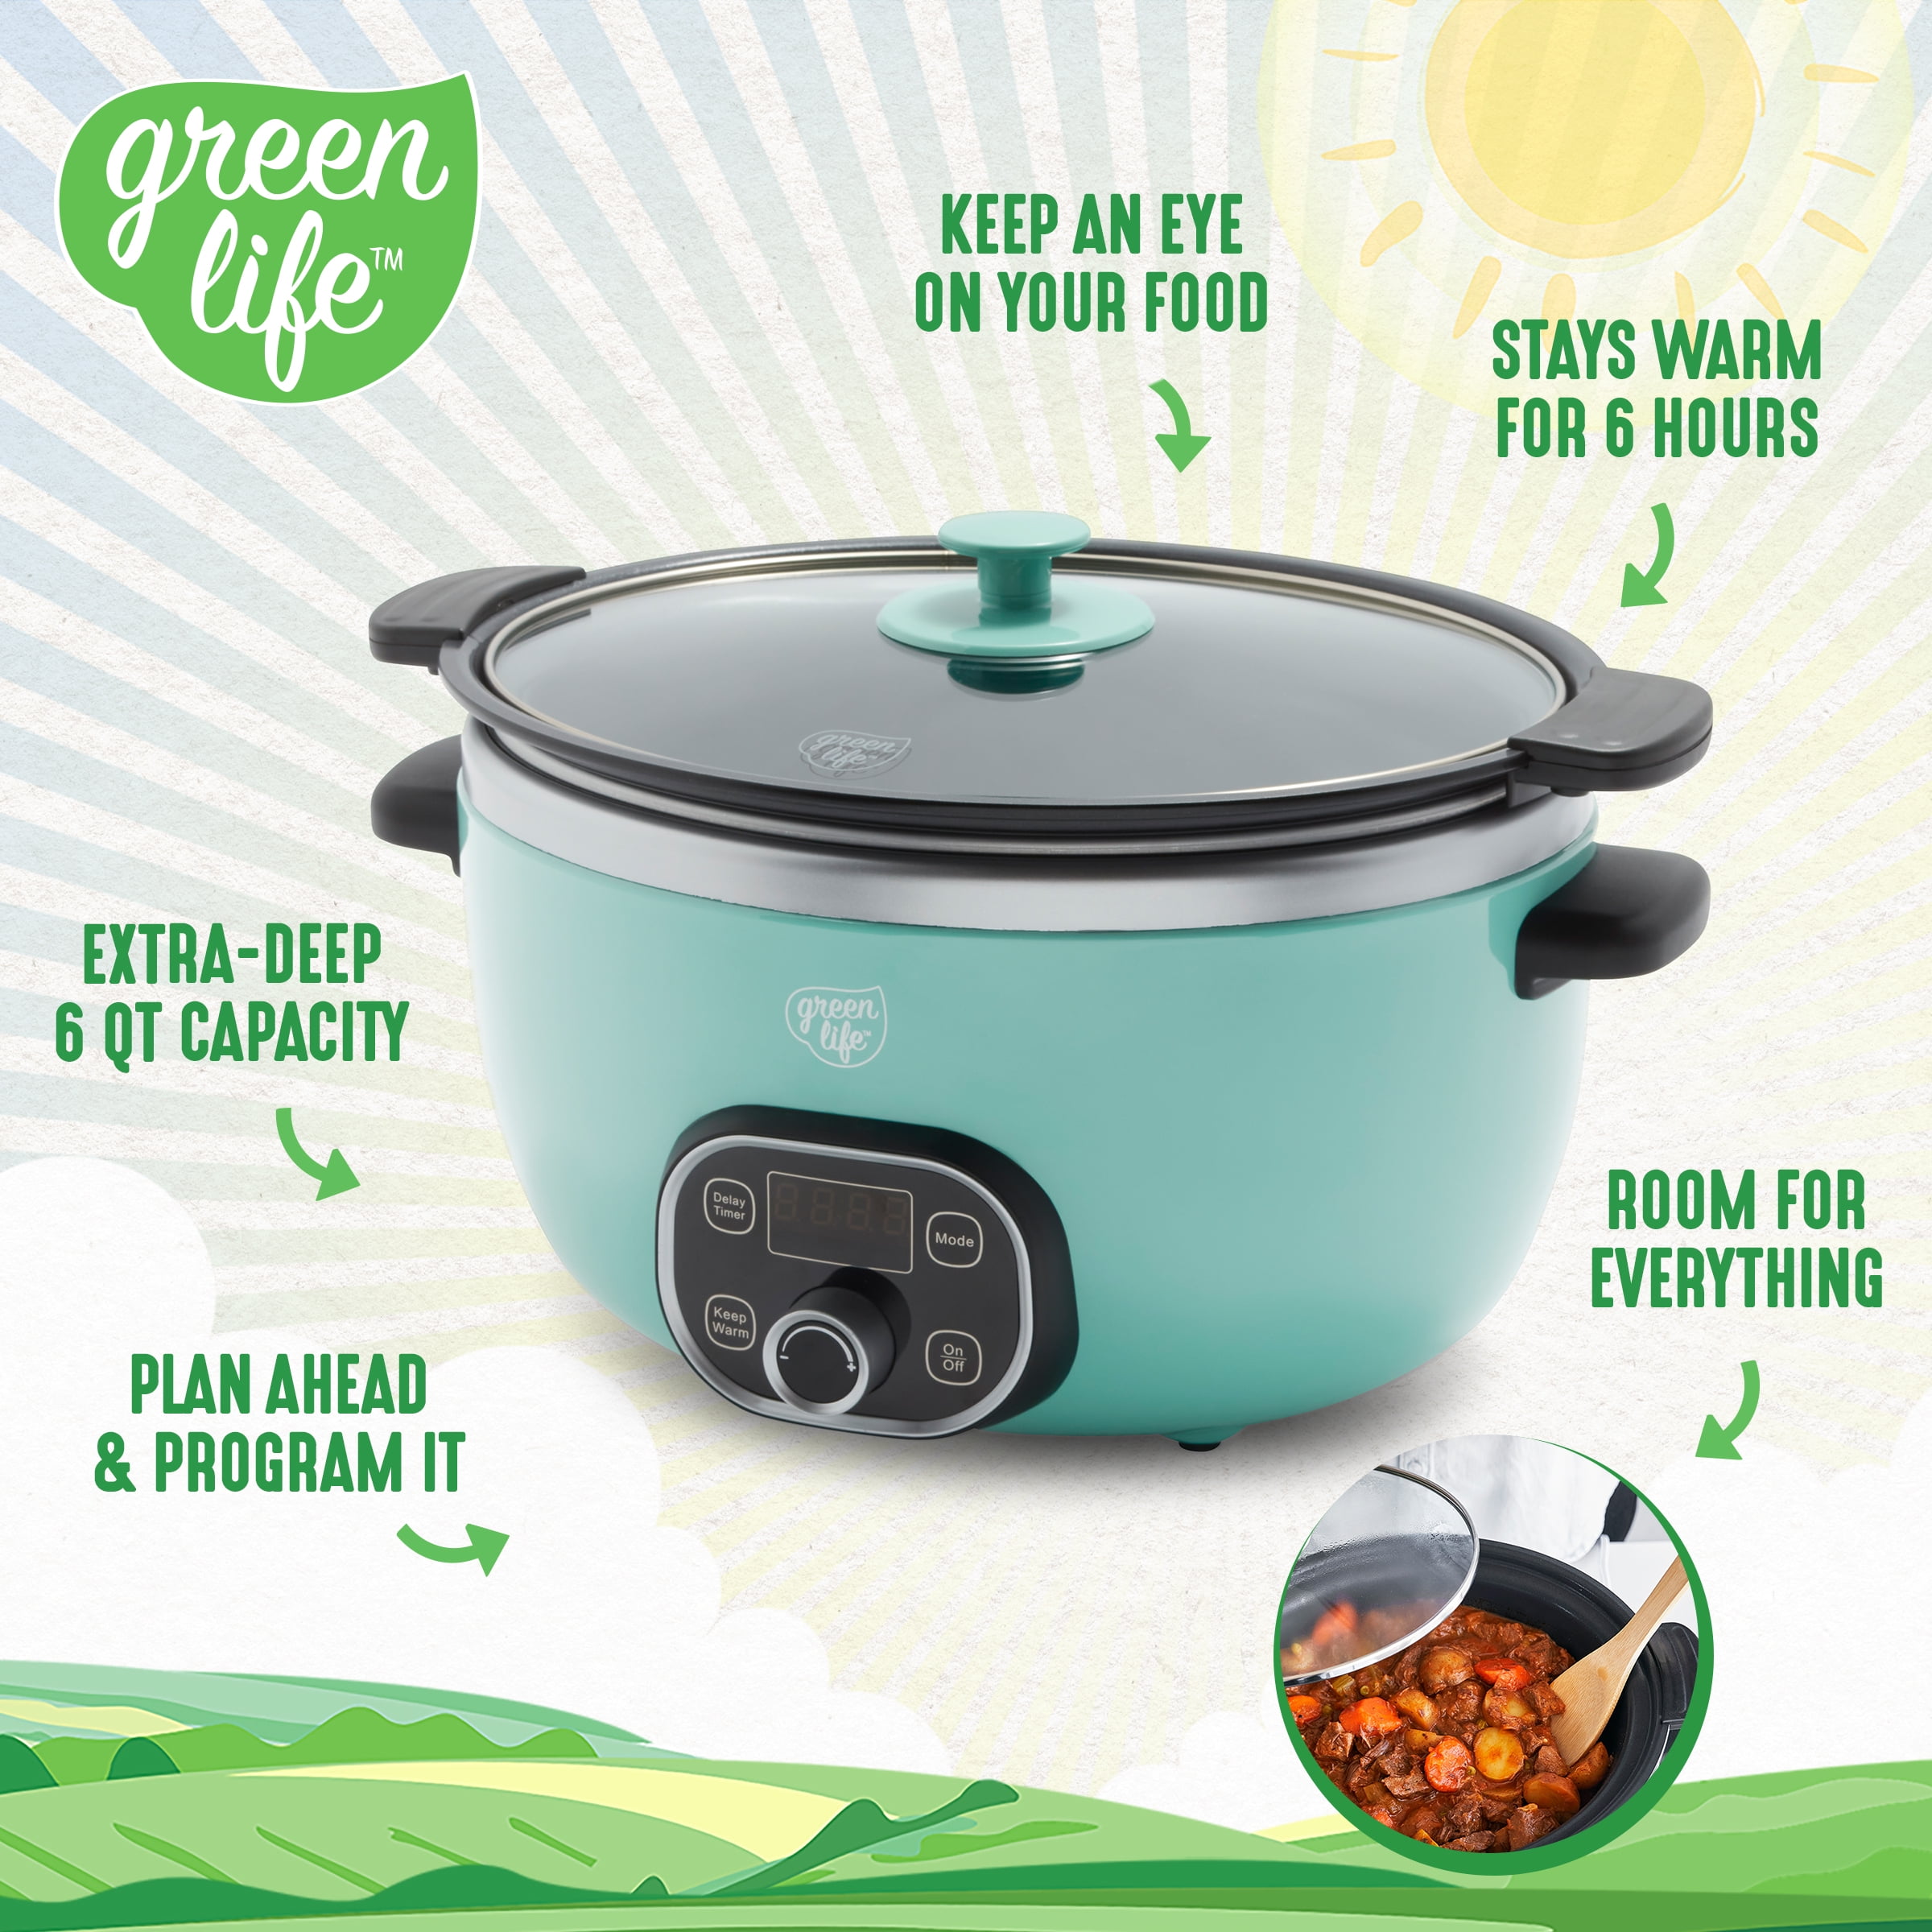 GreenLife Healthy Duo Slow Cooker, Pink